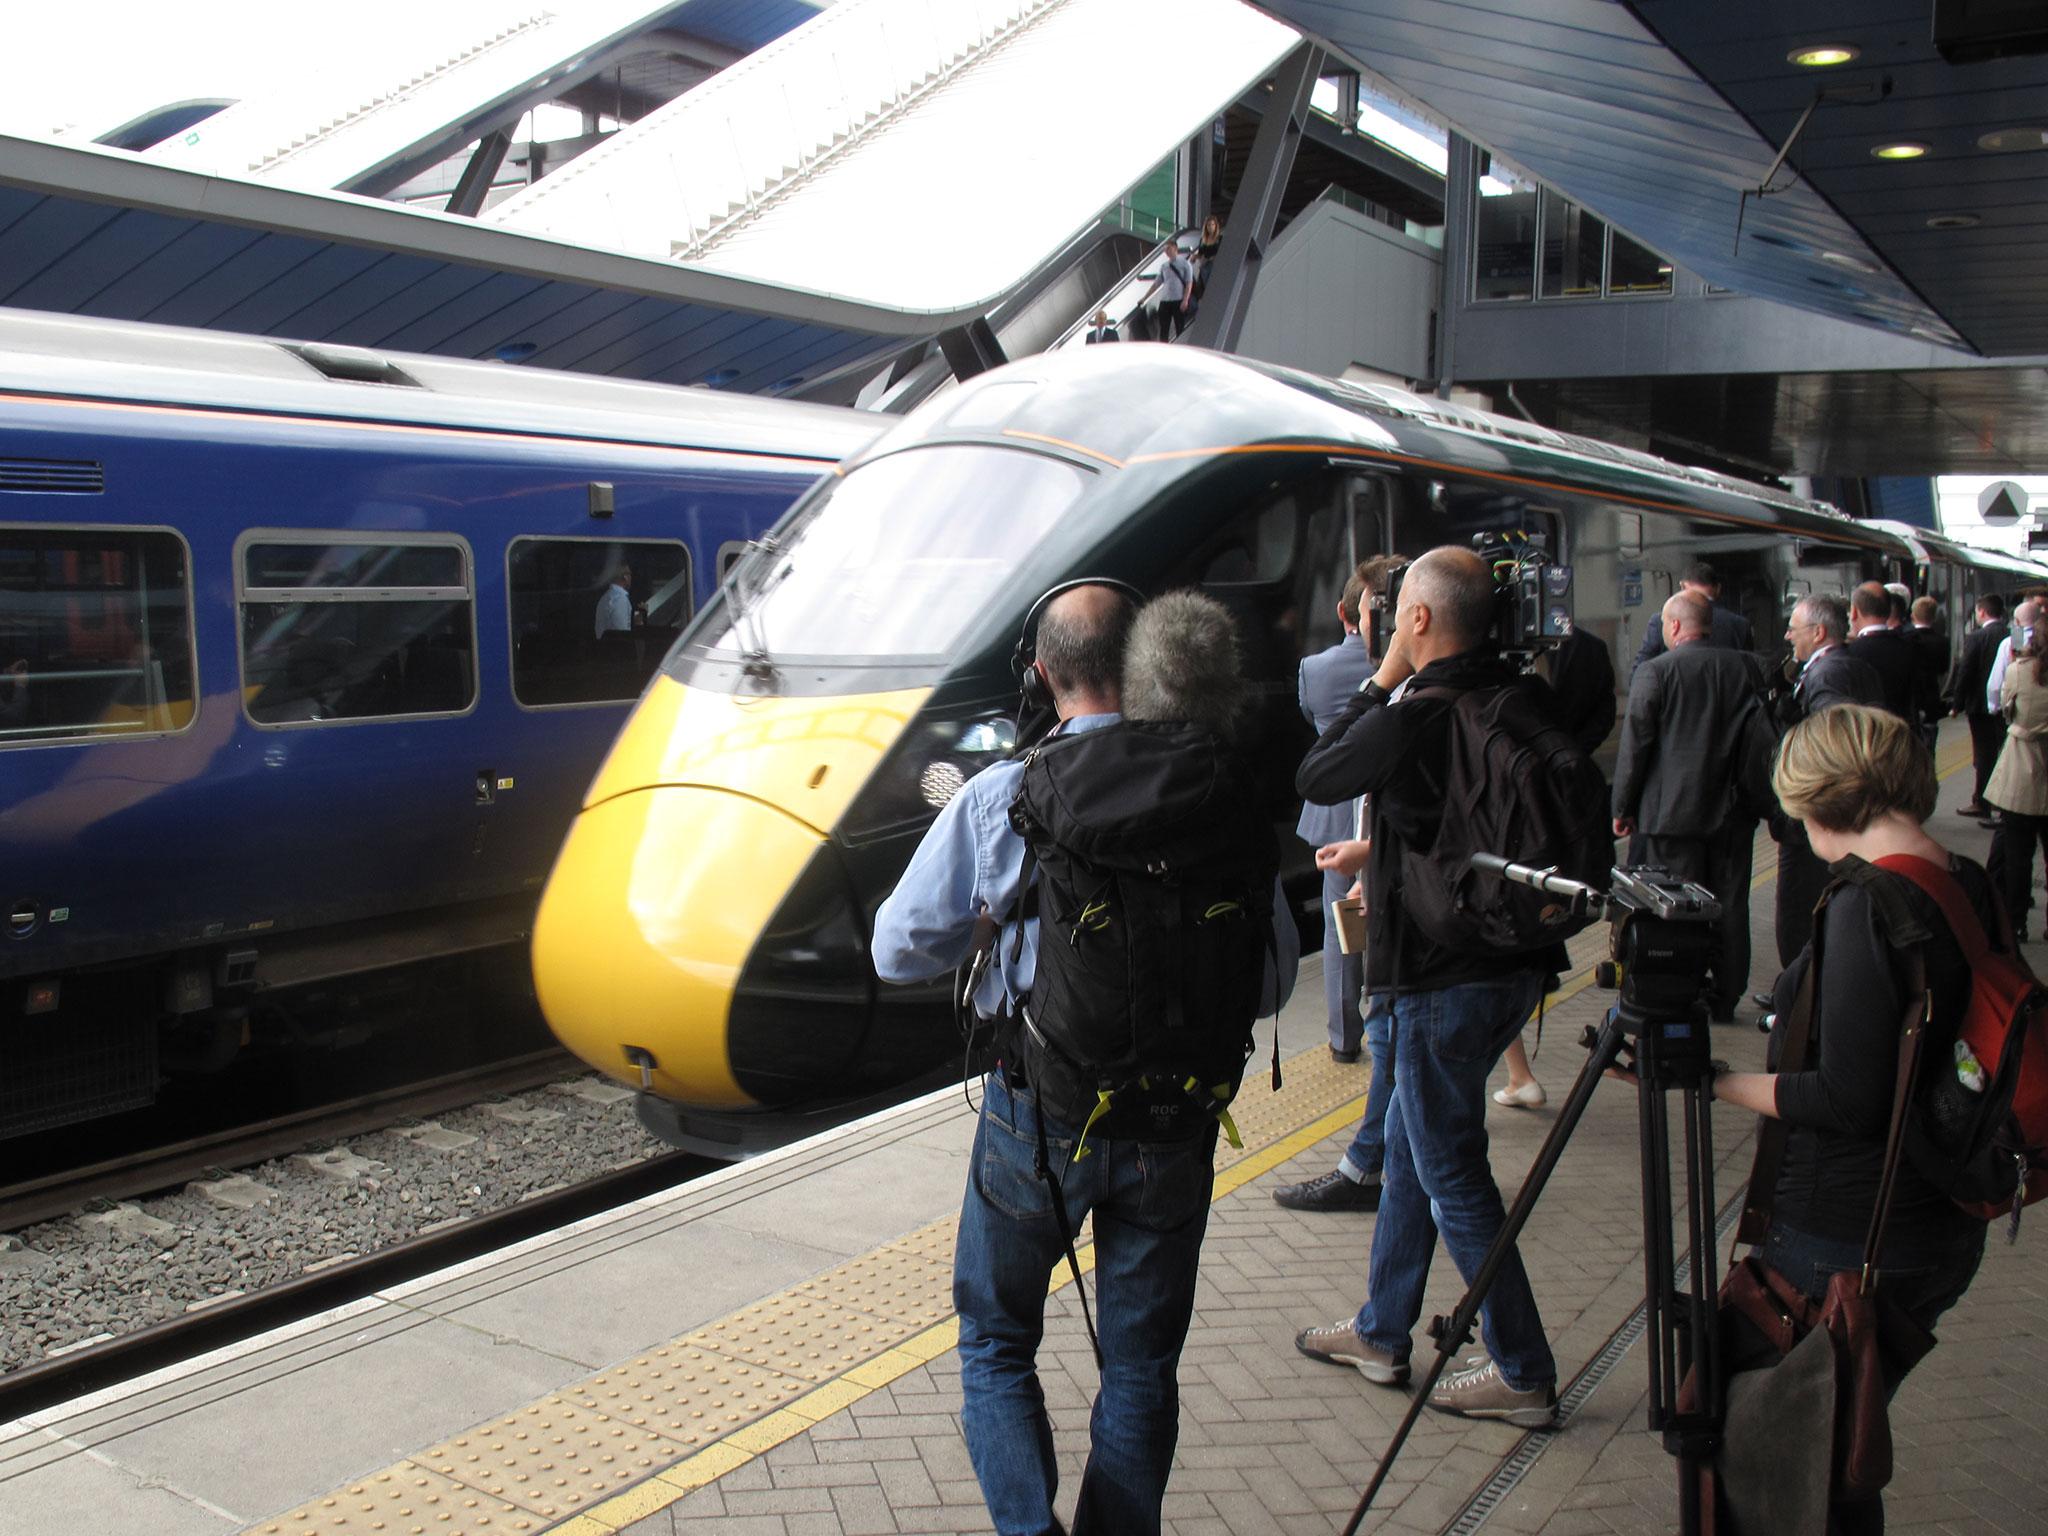 The Japanese-built Hitachi high-speed train, named Isambard Kingdom Brunel, is unveiled to the media at Reading station